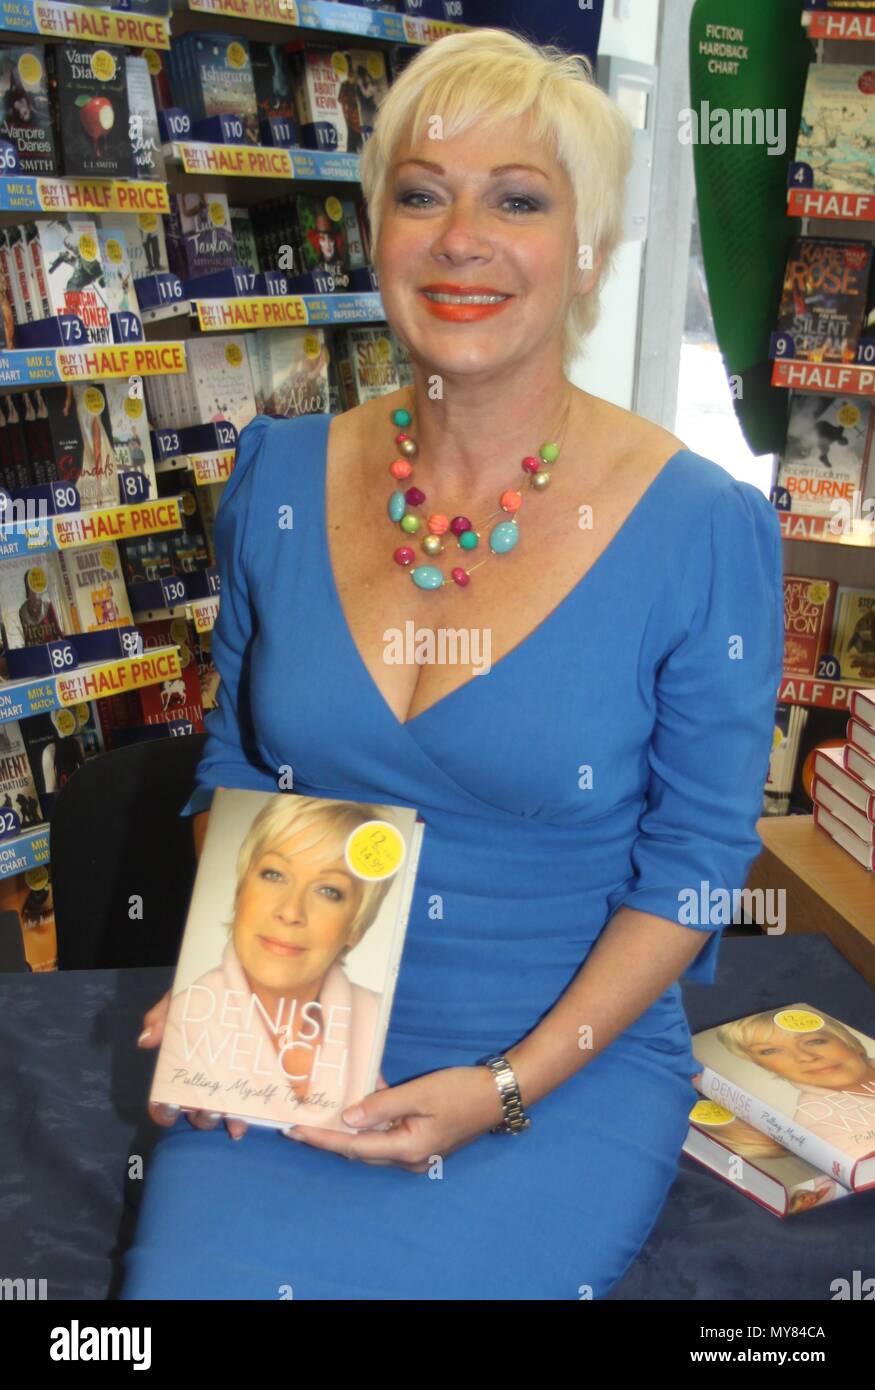 Liverpool,Uk, Denise Welch signs copies of her autobiography in Liverpool wh smiths credit Ian Fairbrother/Alamy Stock Photos Stock Photo